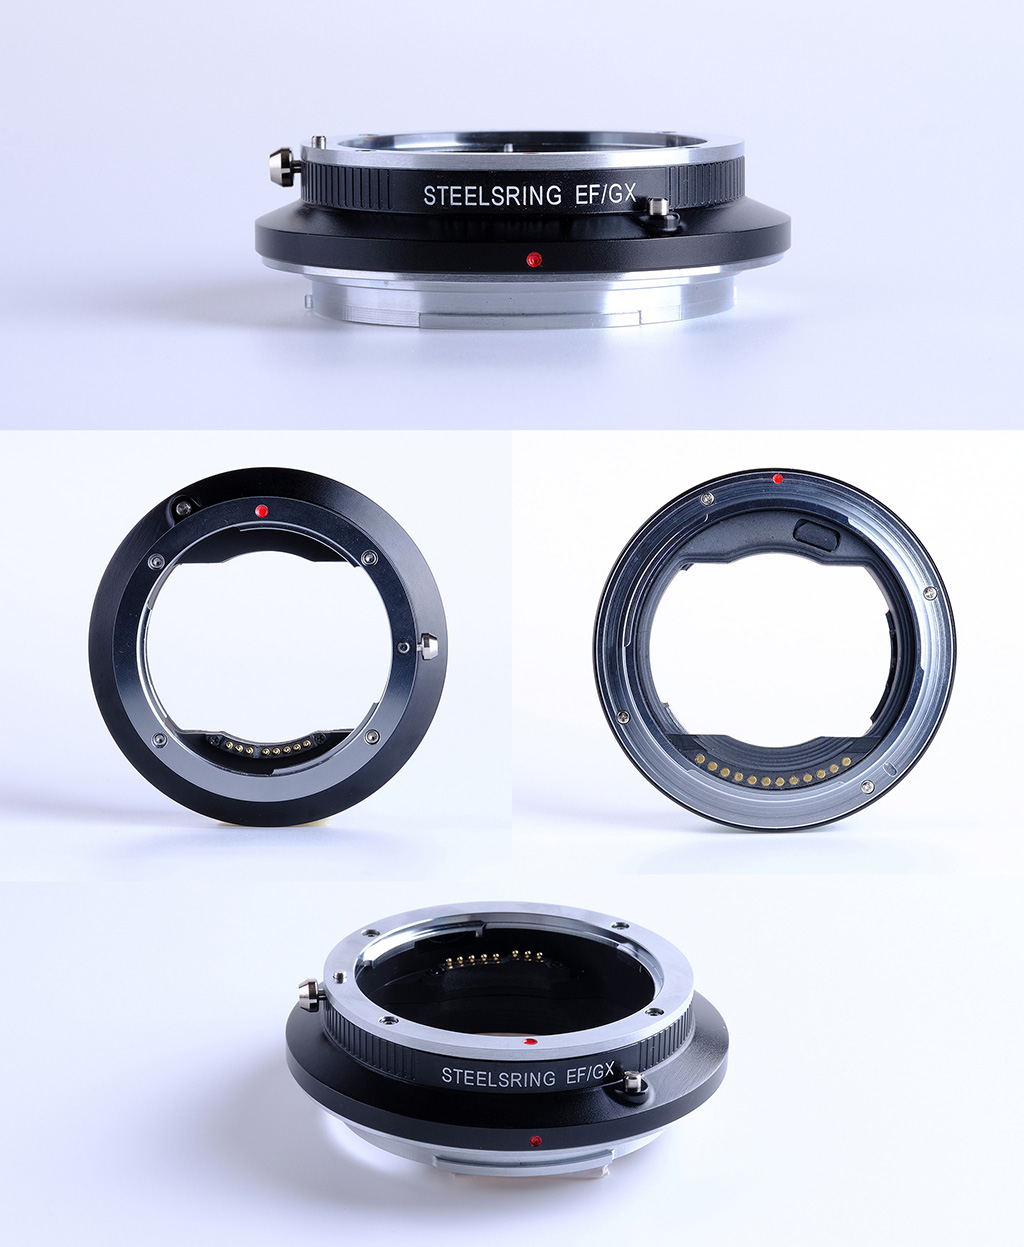 Smart Adapters for GFX Cameras – Steel's Rings